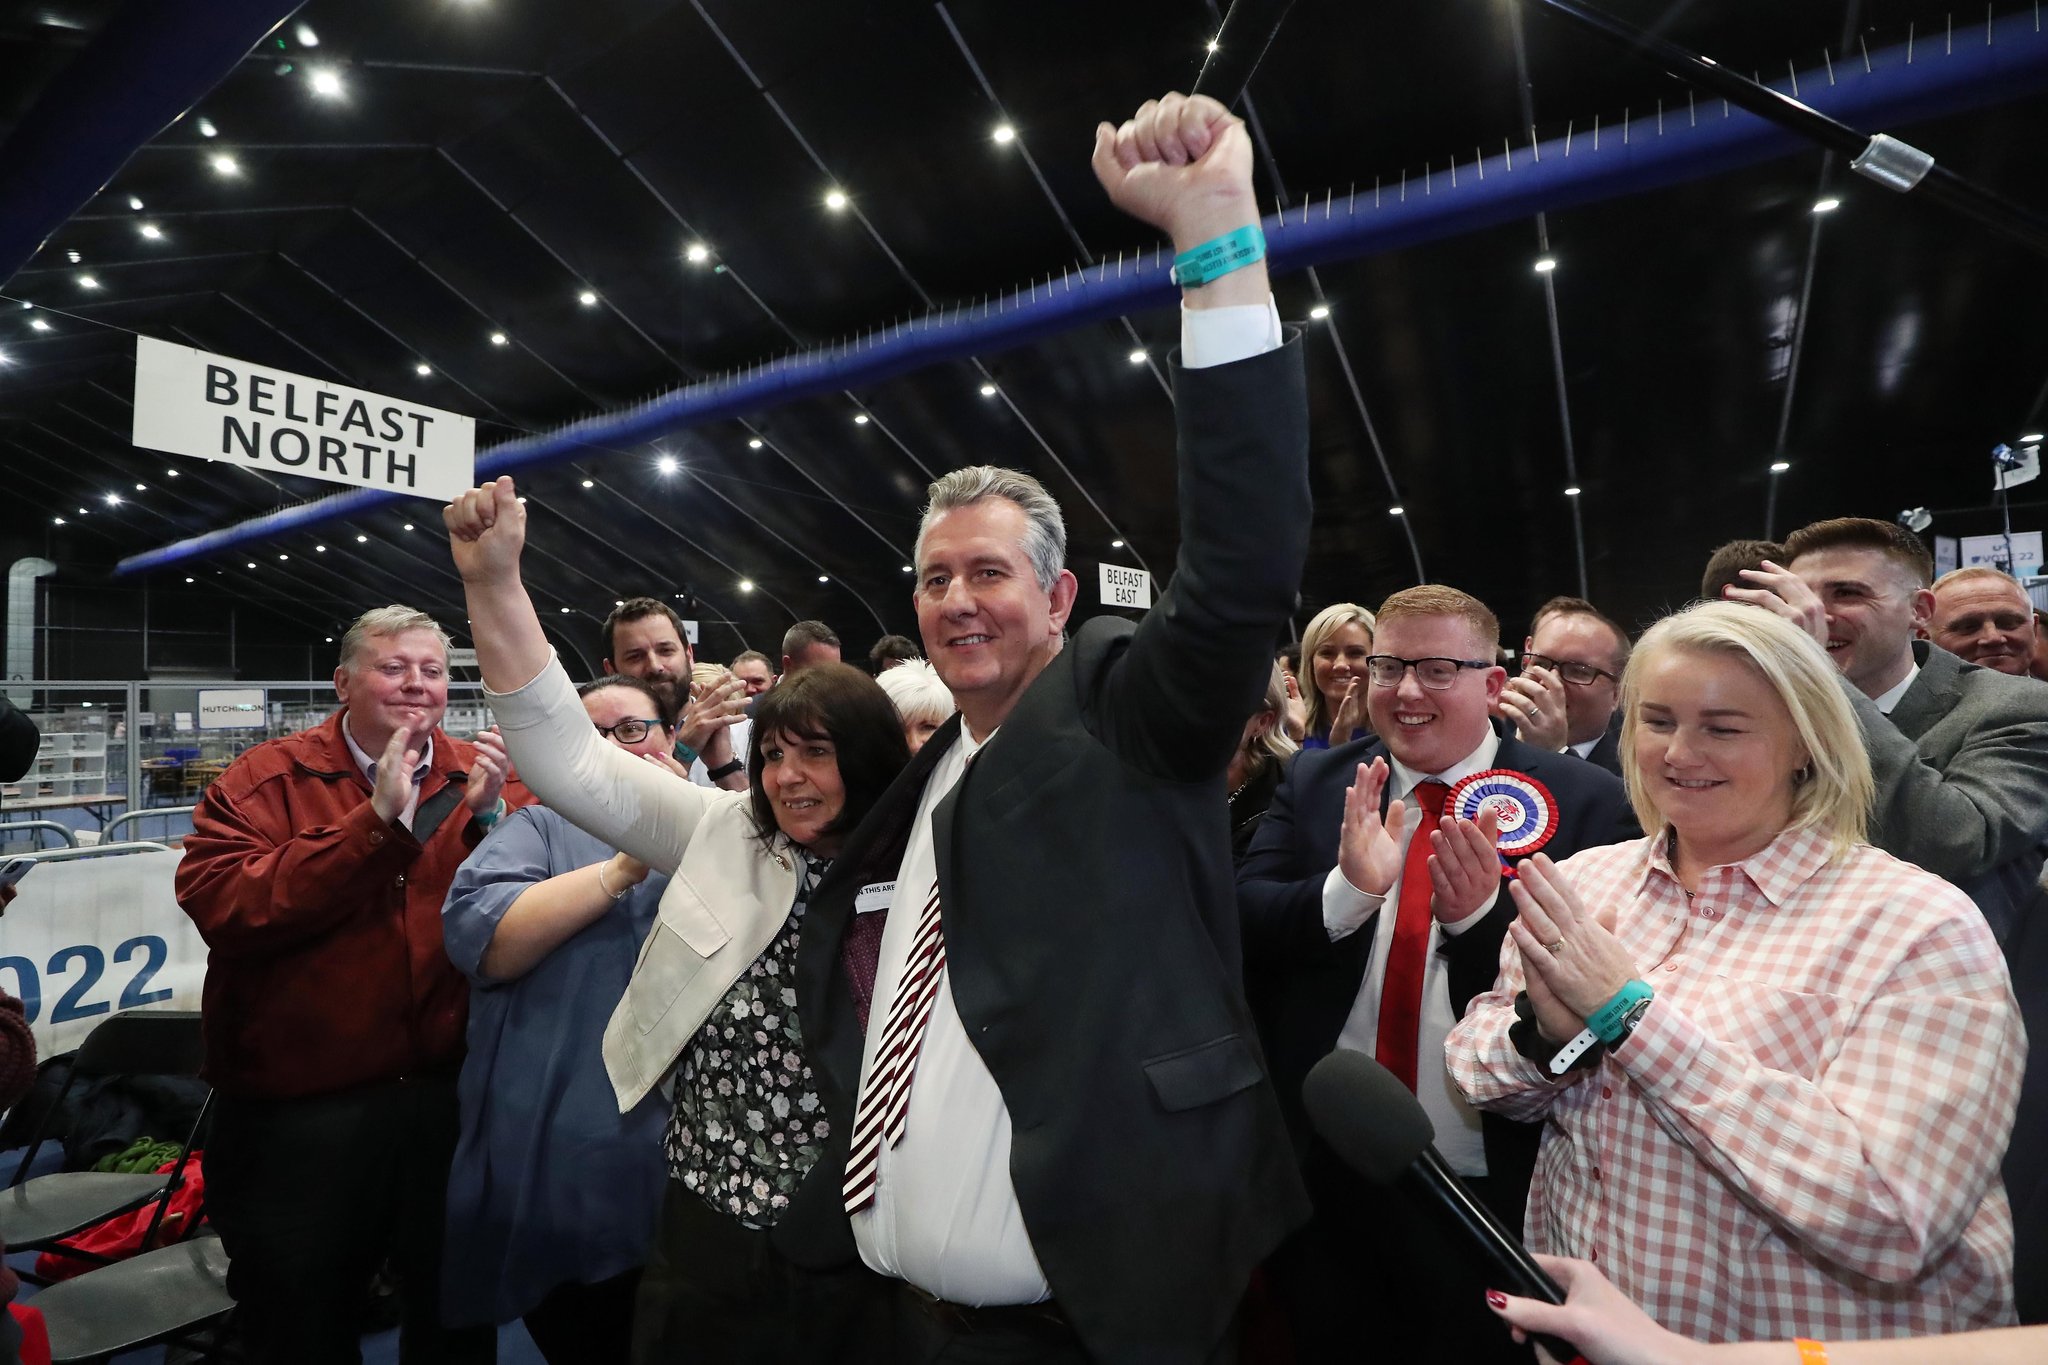 Election 2022: Poots takes South Belfast seat but memories of Stalford hurt